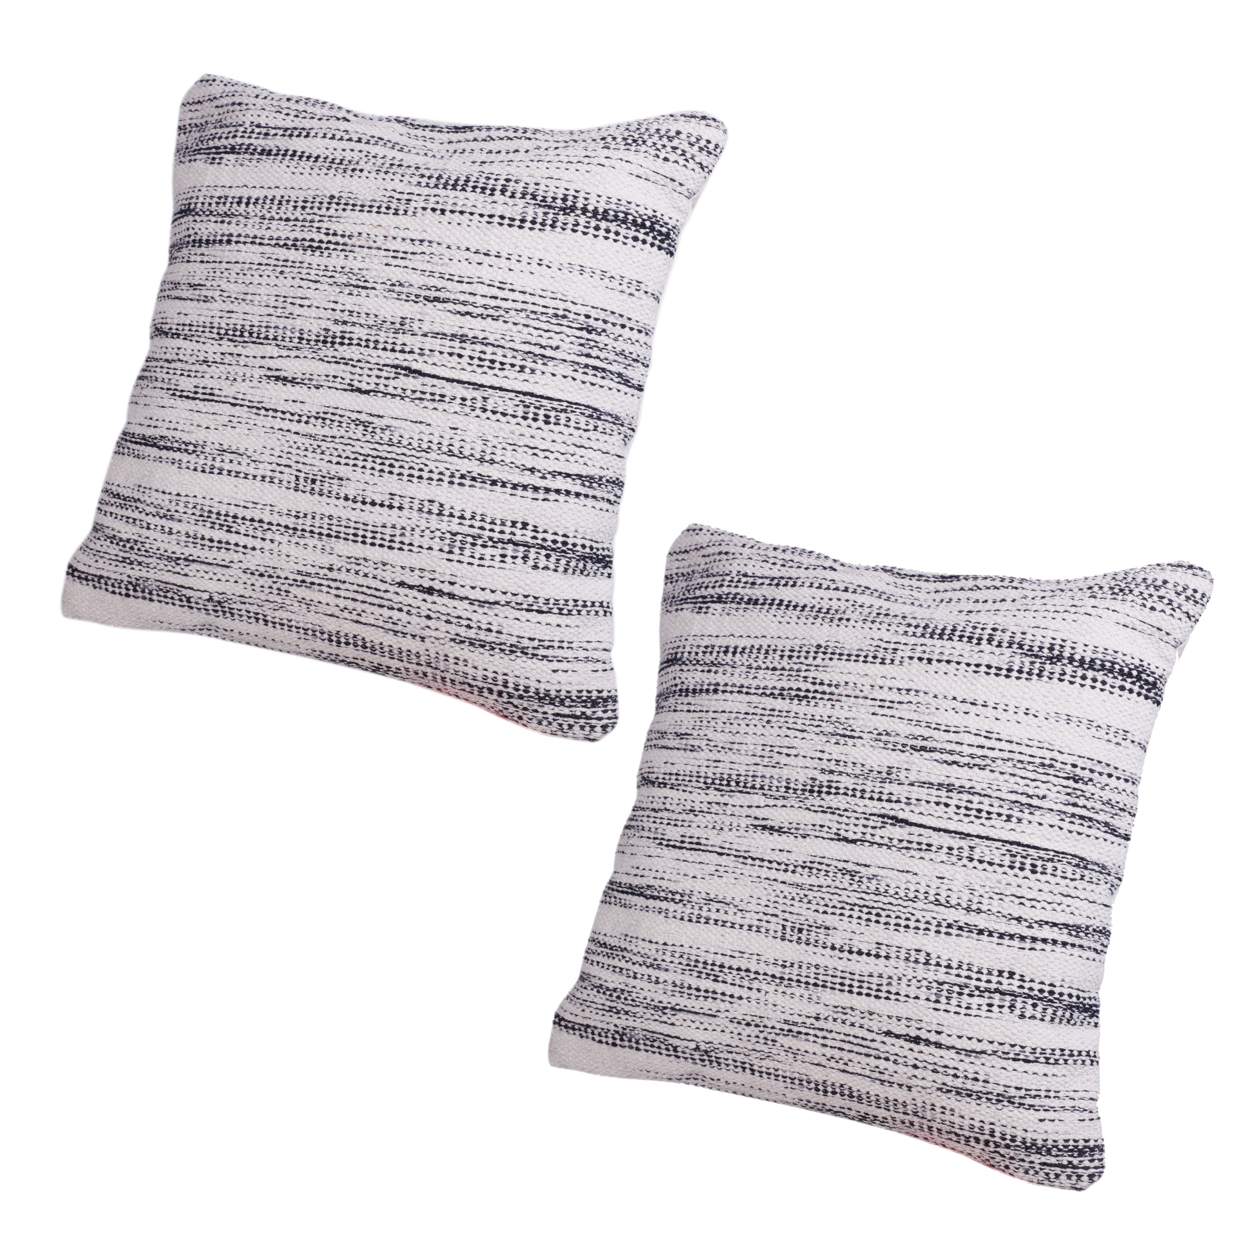 18 X 18 Handcrafted Cotton Accent Throw Pillows, Woven Lined Design, Set Of 2, White, Gray, Black